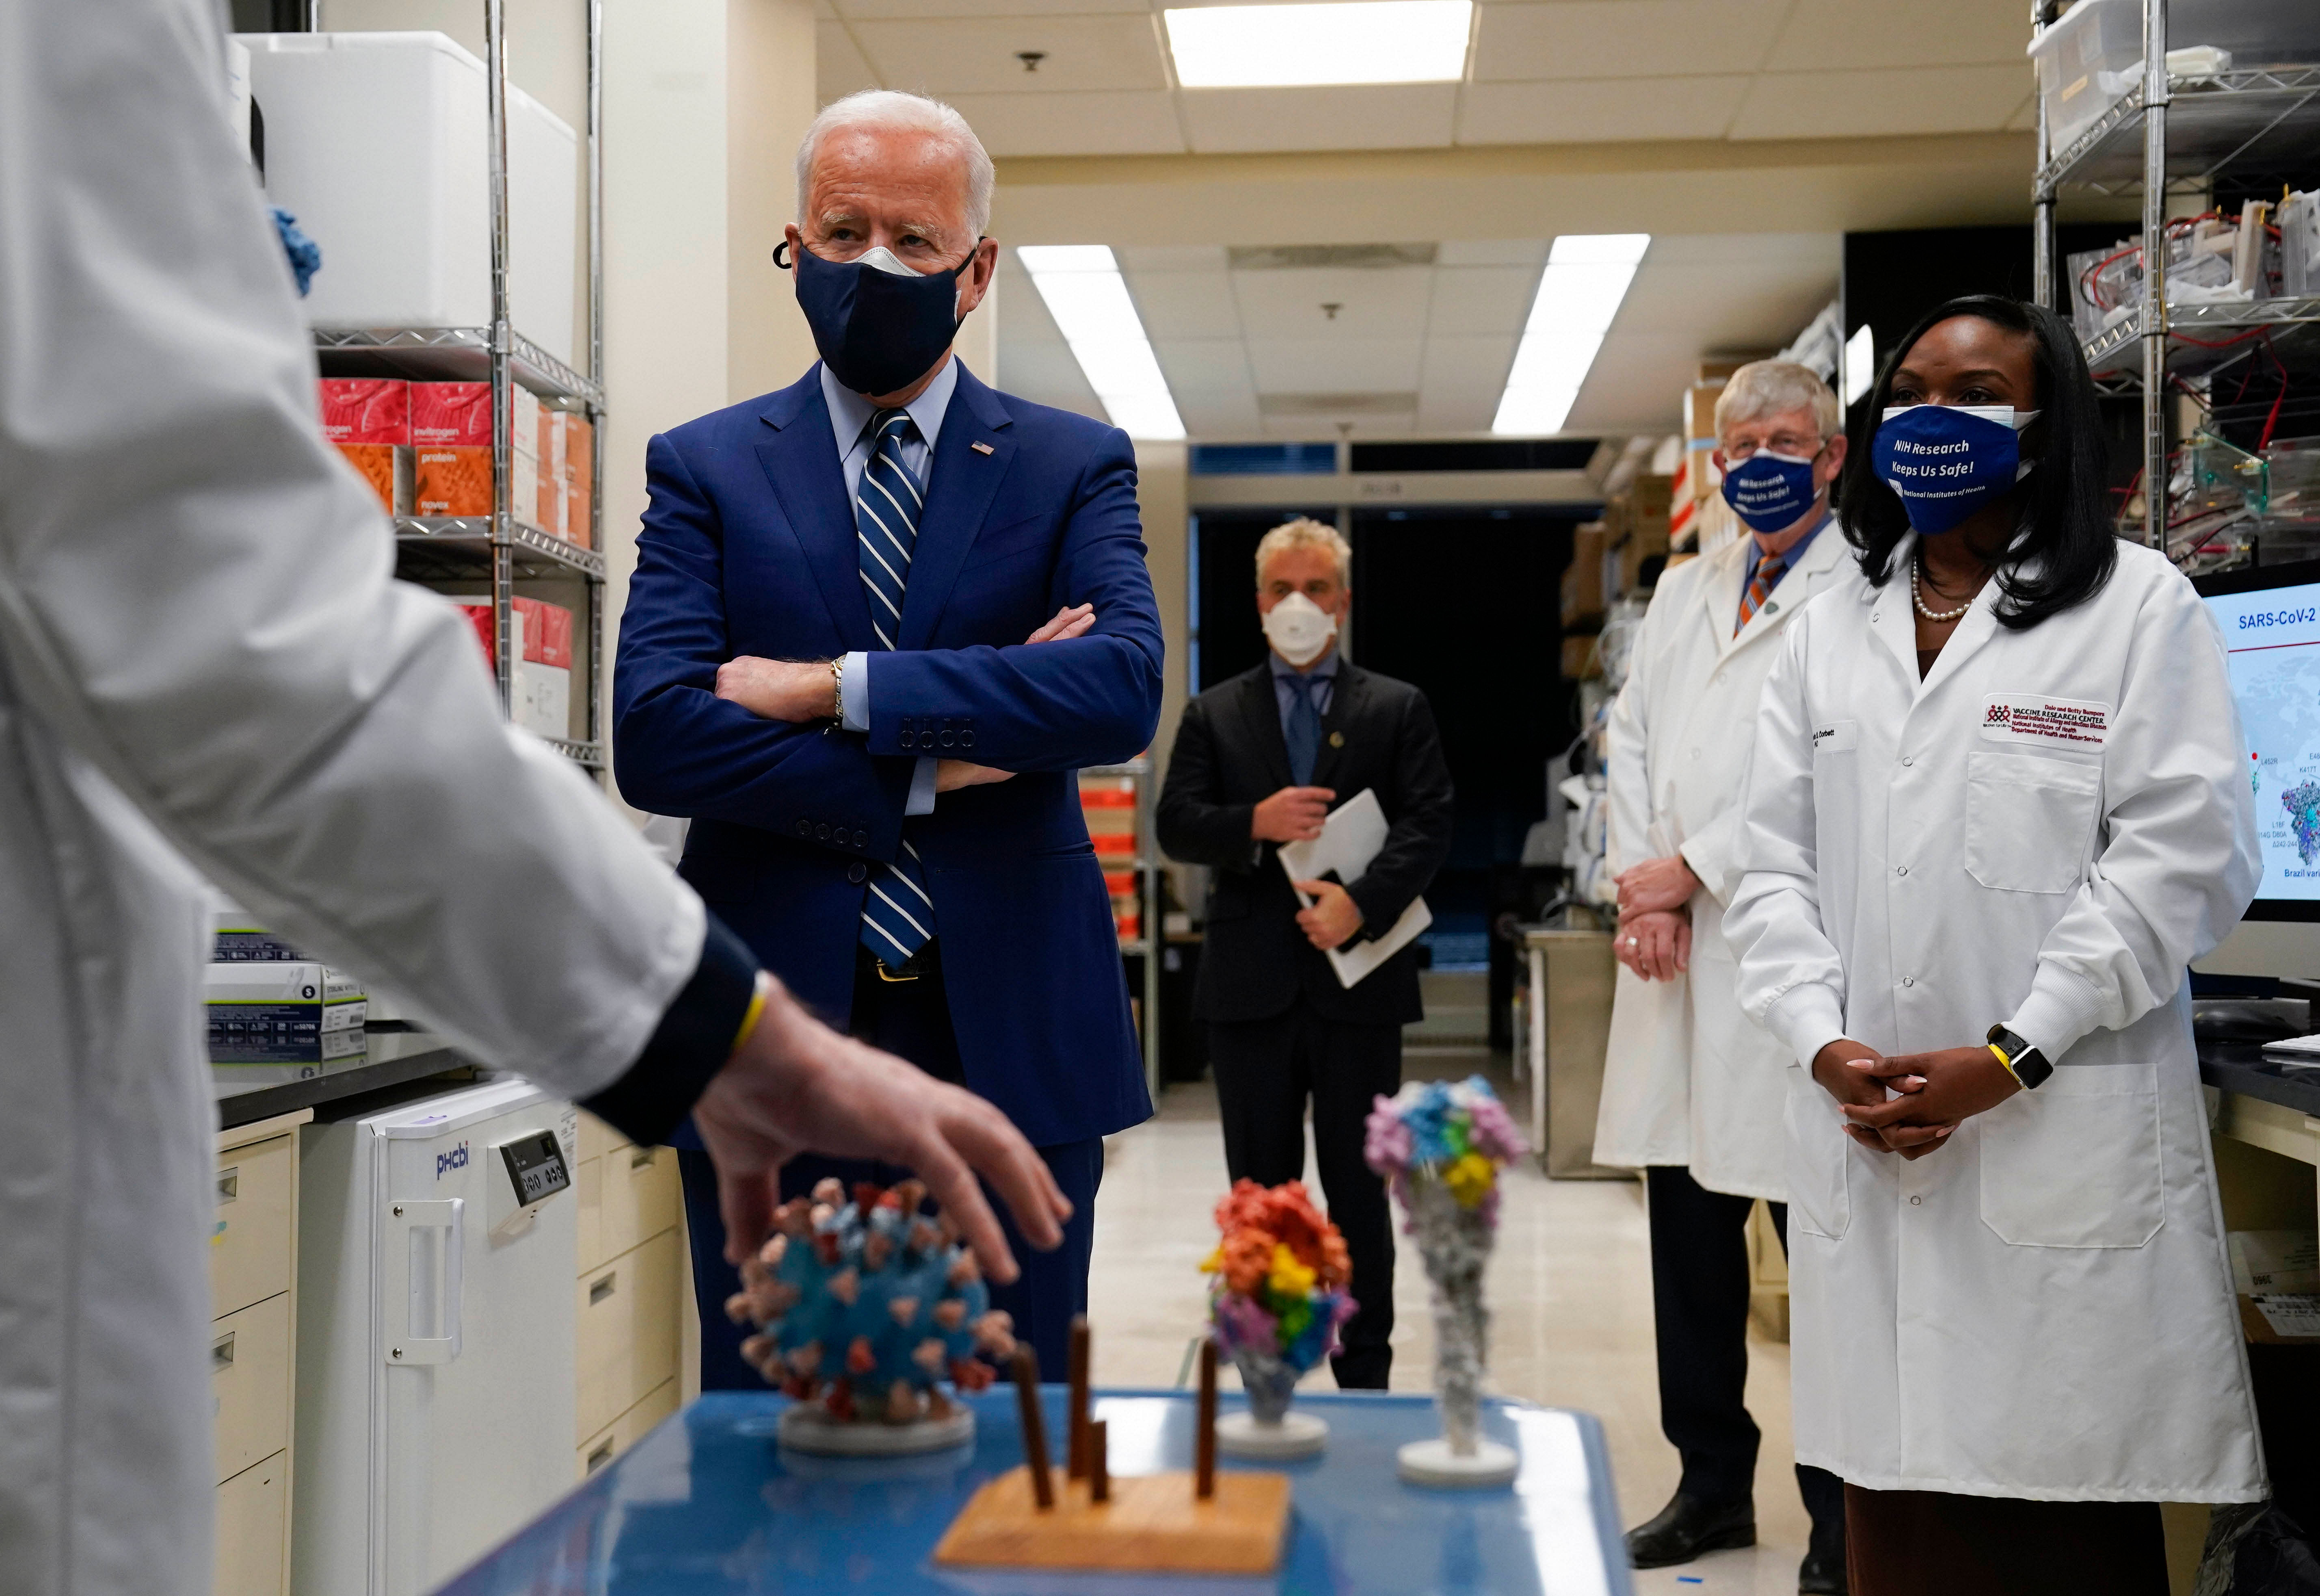 Bethesda: Dr. Barney Graham, left, speaks as President Joe Biden listens during a visit to the Viral Pathogenesis Laboratory at the National Institutes of Health (NIH), Thursday, Feb. 11, 2021, in Bethesda, Md. Francis Collins, Kizzmekia Corbett, an immunologist with the Vaccine Research Center at the NIH, right, and NIH Director, second from right, listen. Credit: AP/PTI